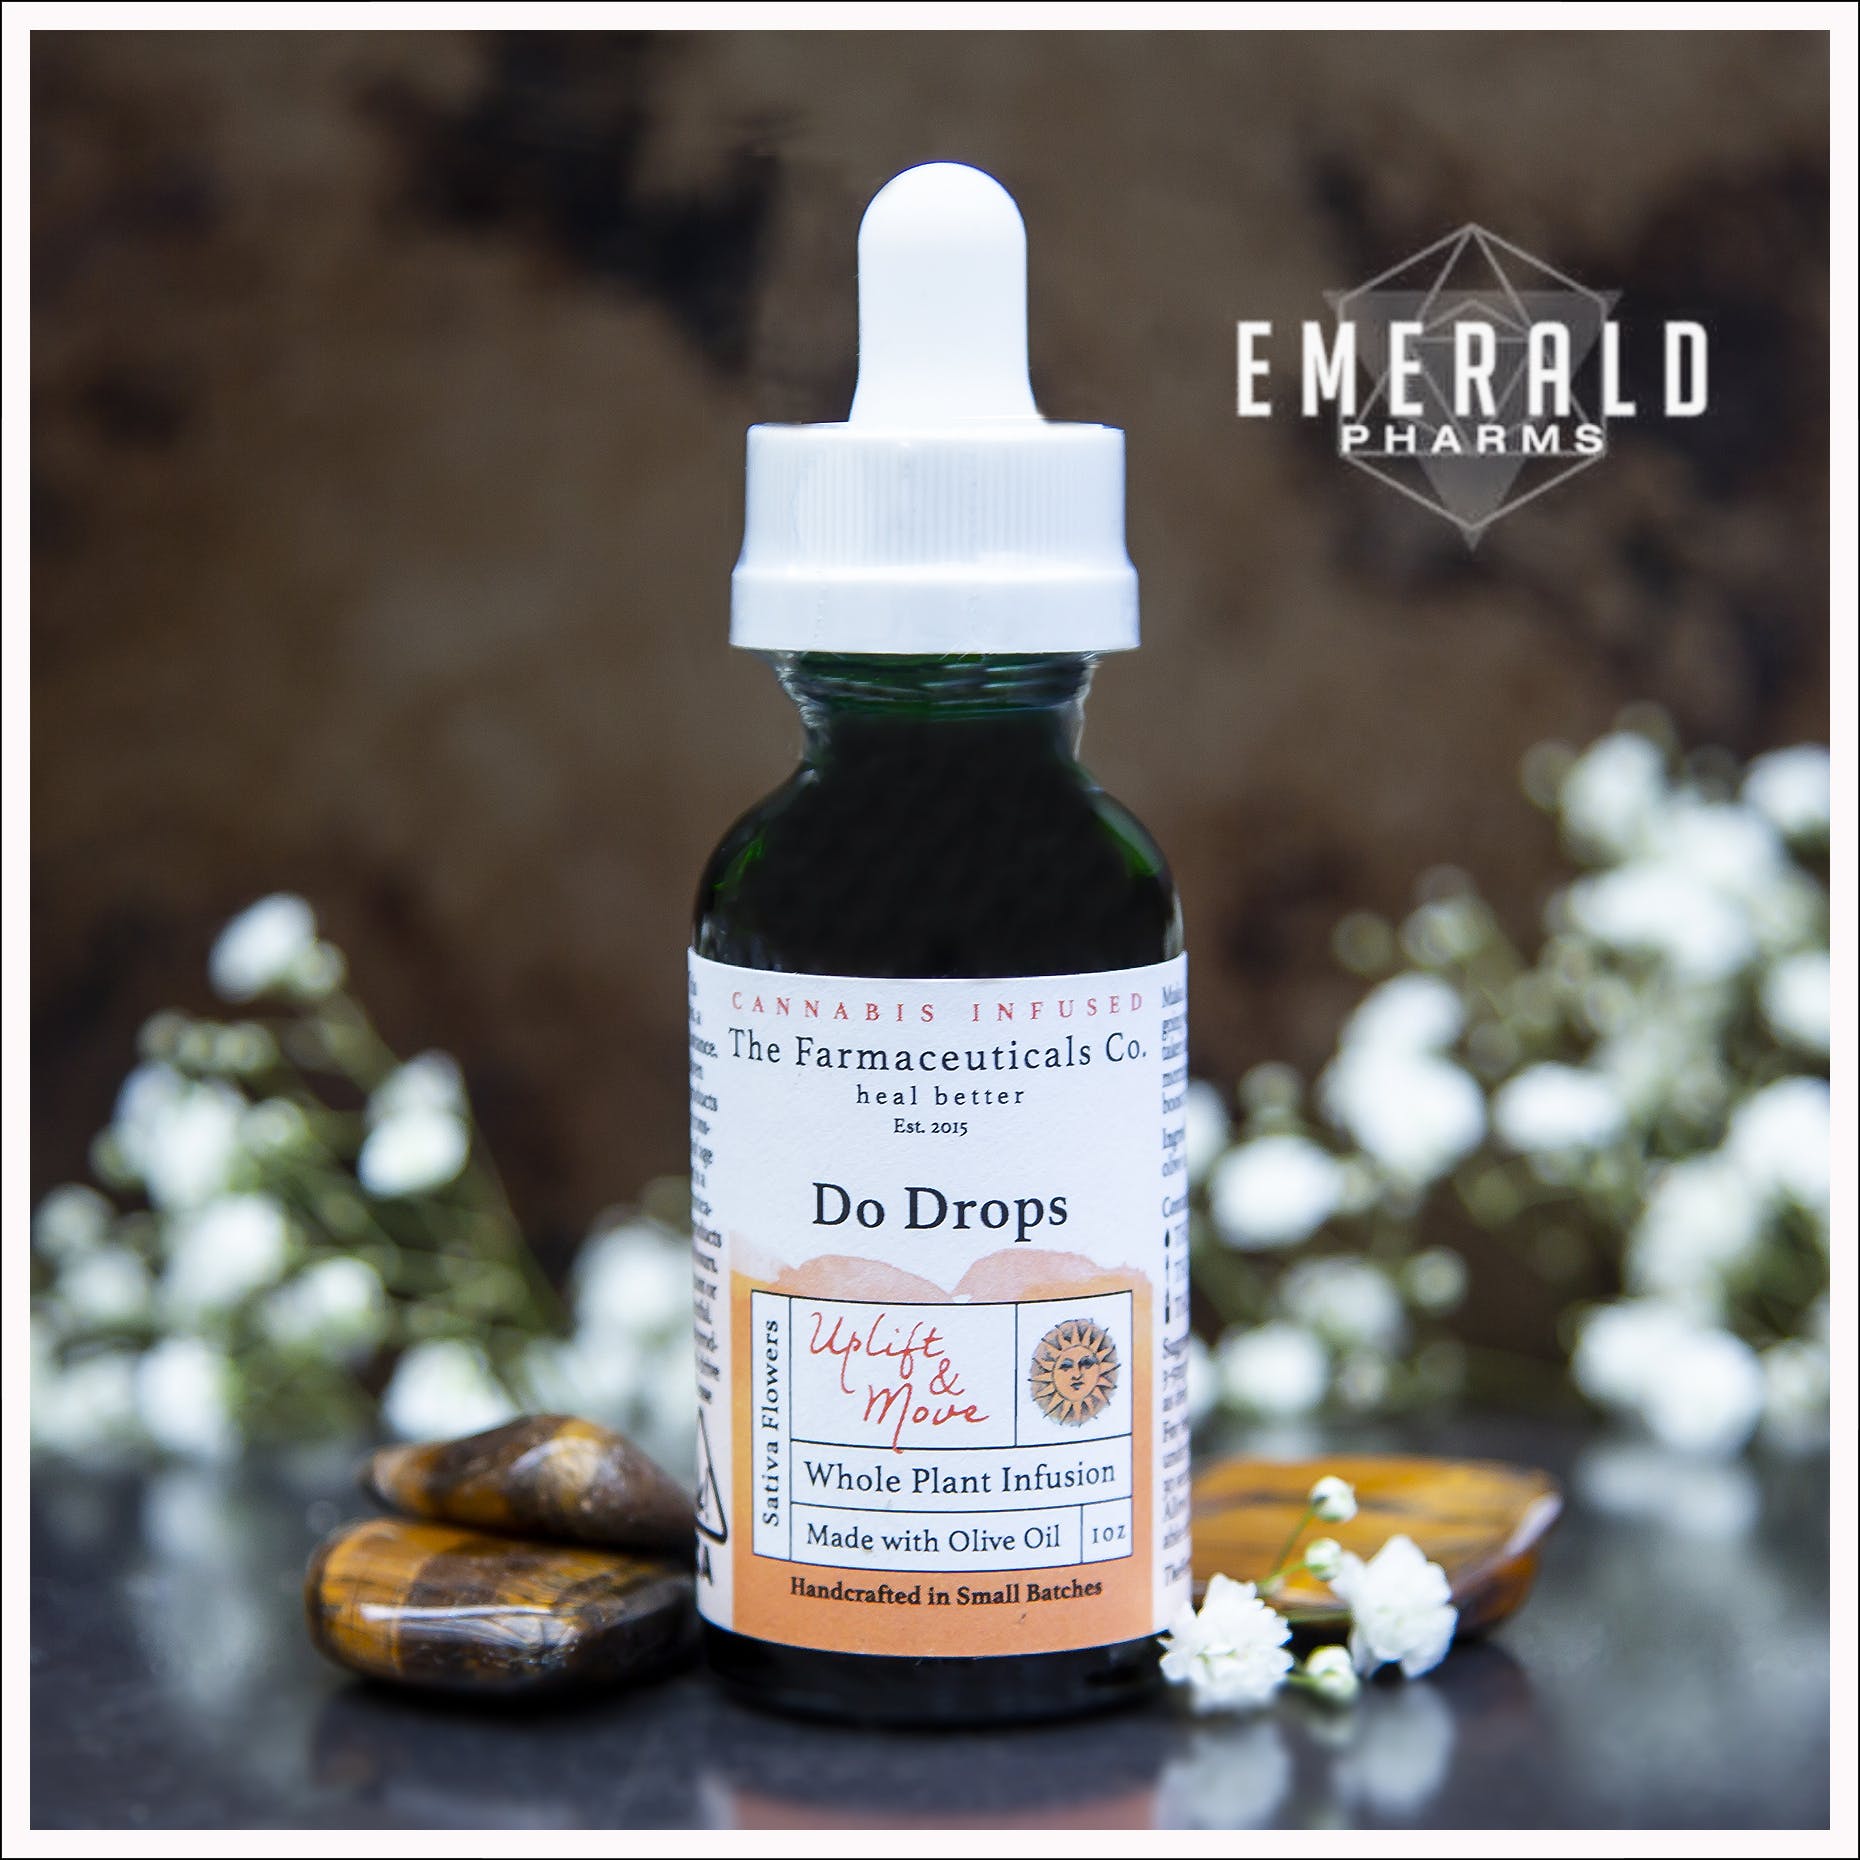 Do Drops Uplift & Move 300 mg by The Farmaceuticals Co.